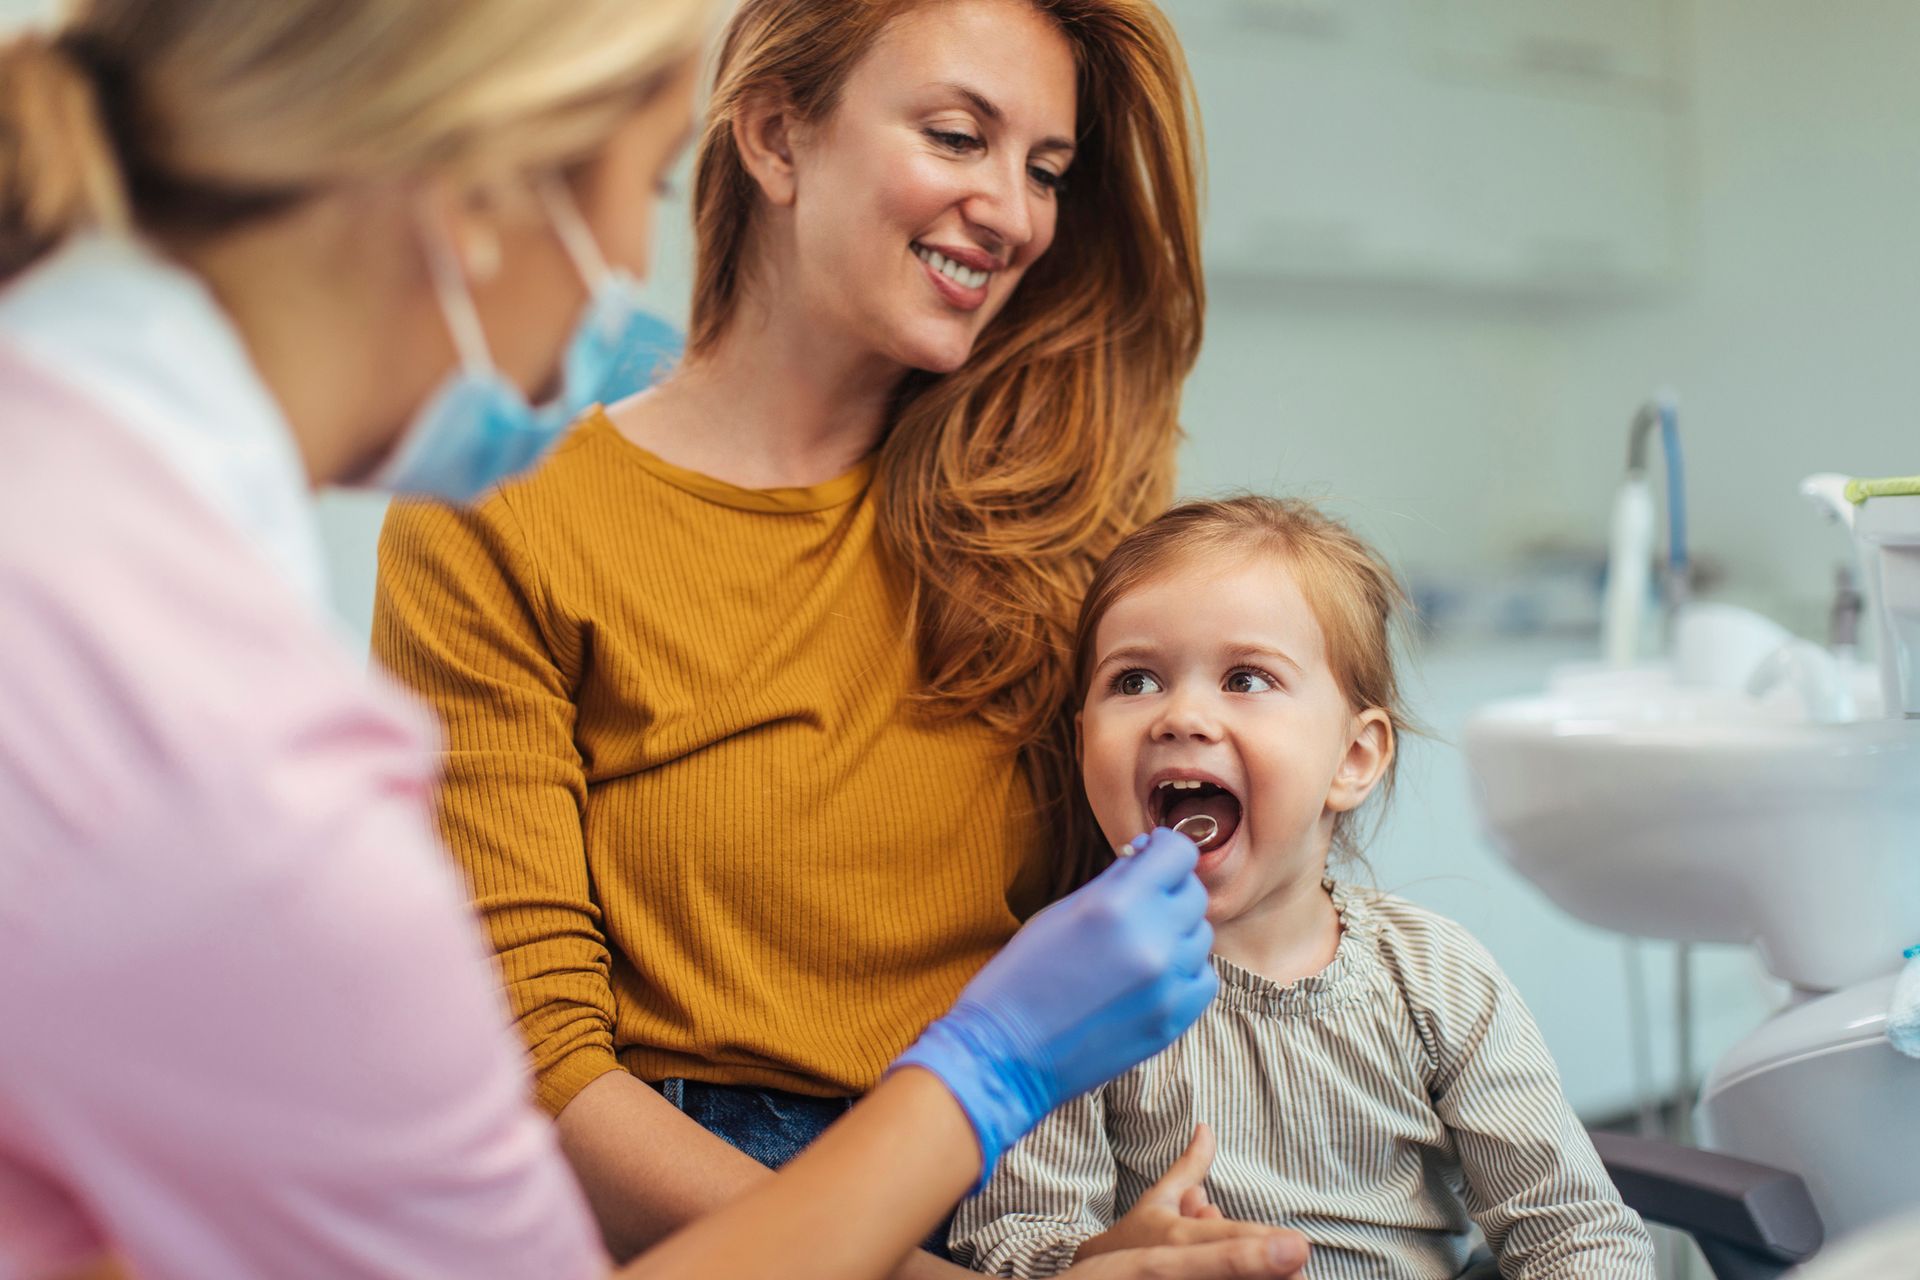 A woman is holding a little girl while a dentist examines her teeth.